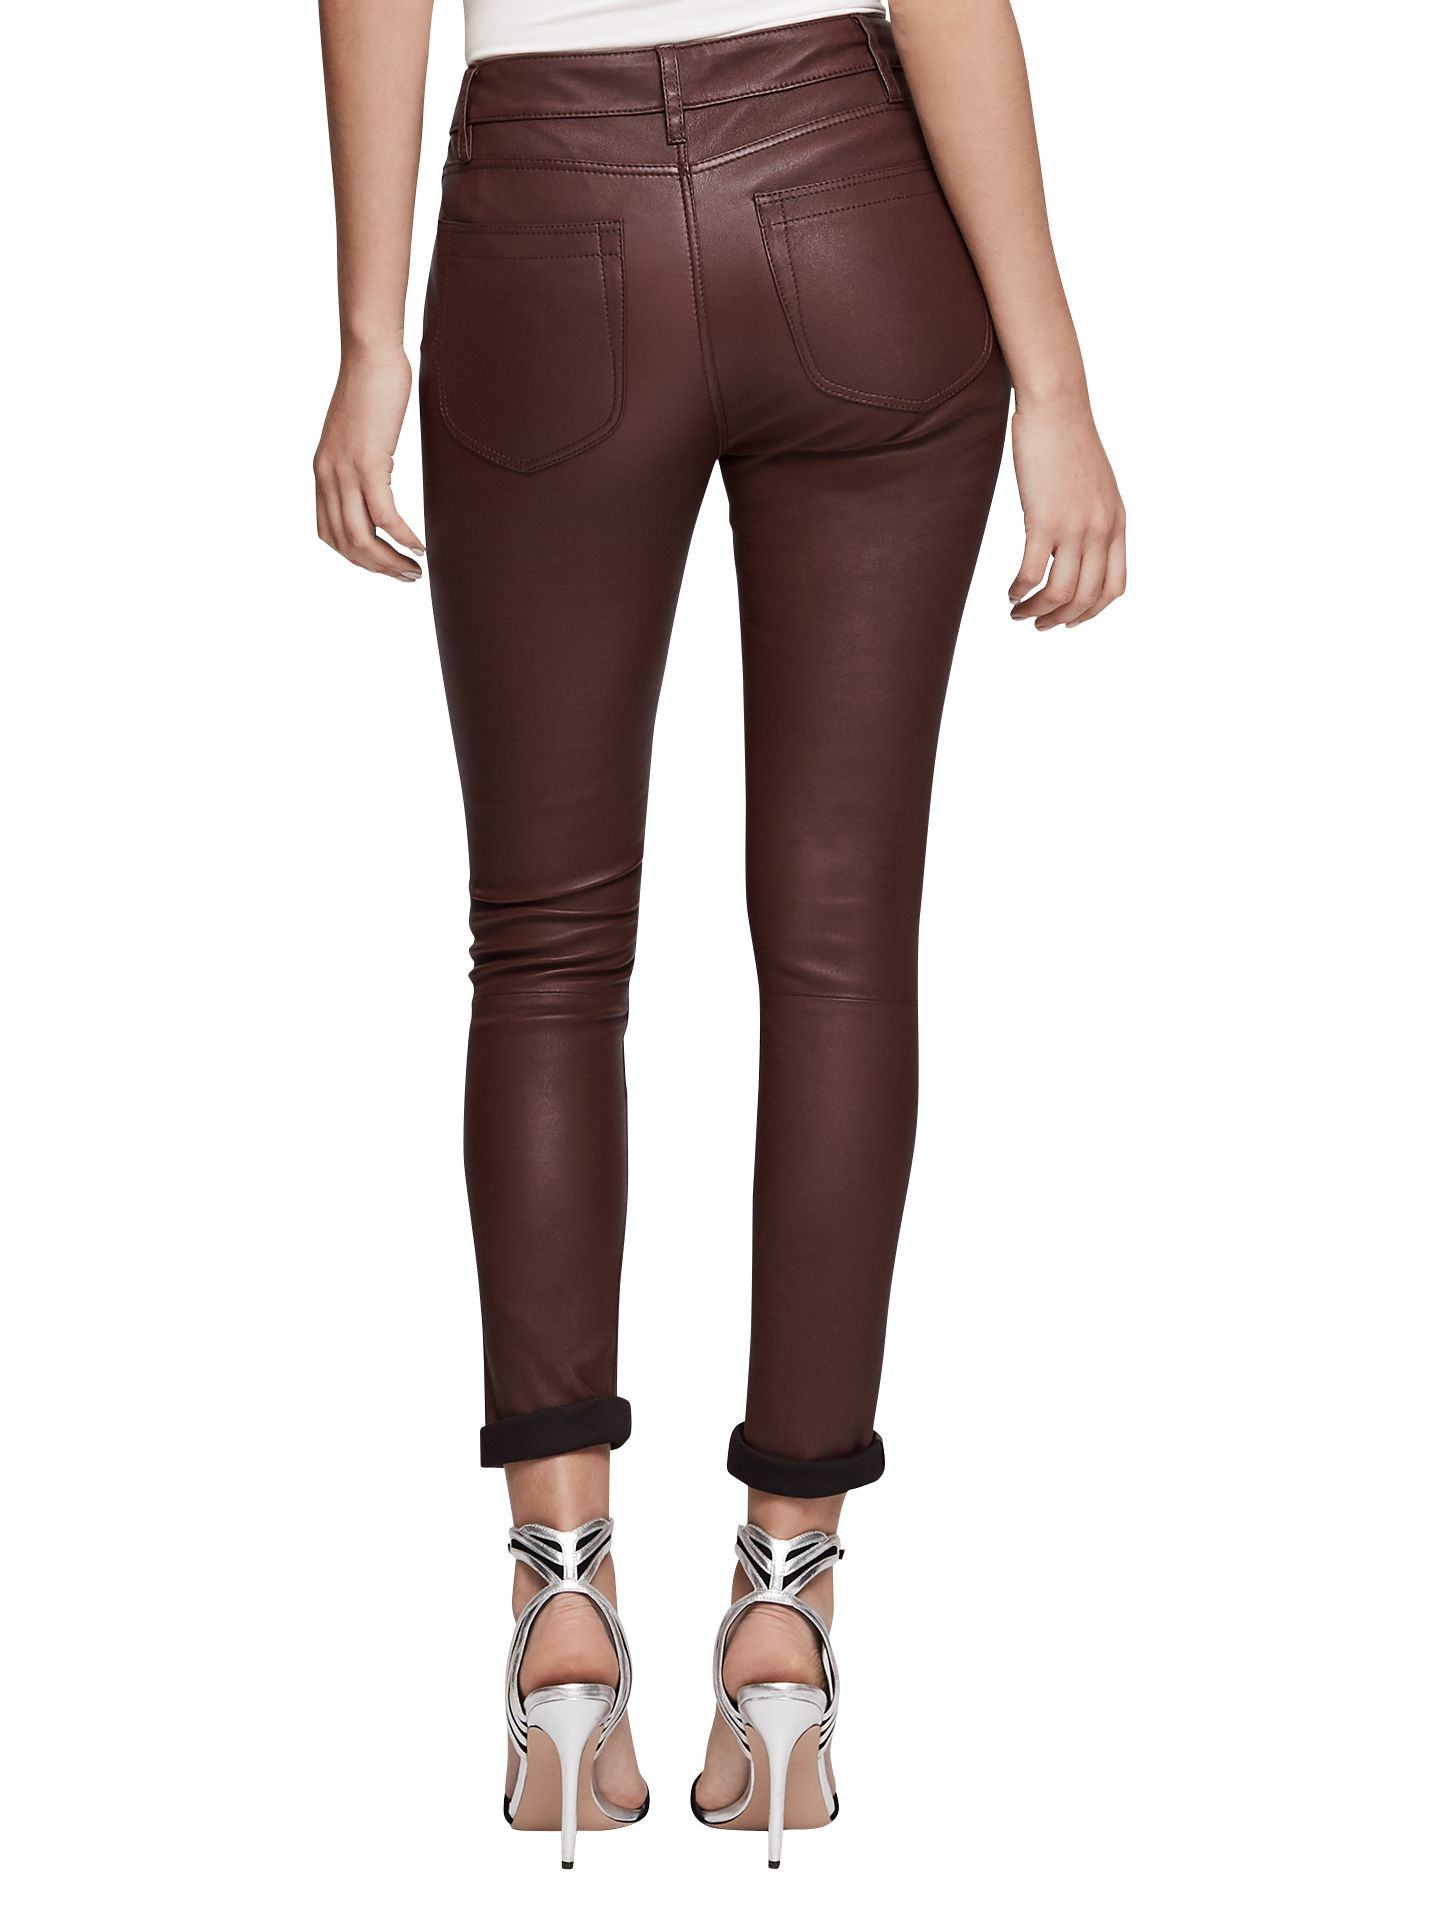 oxblood leather trousers